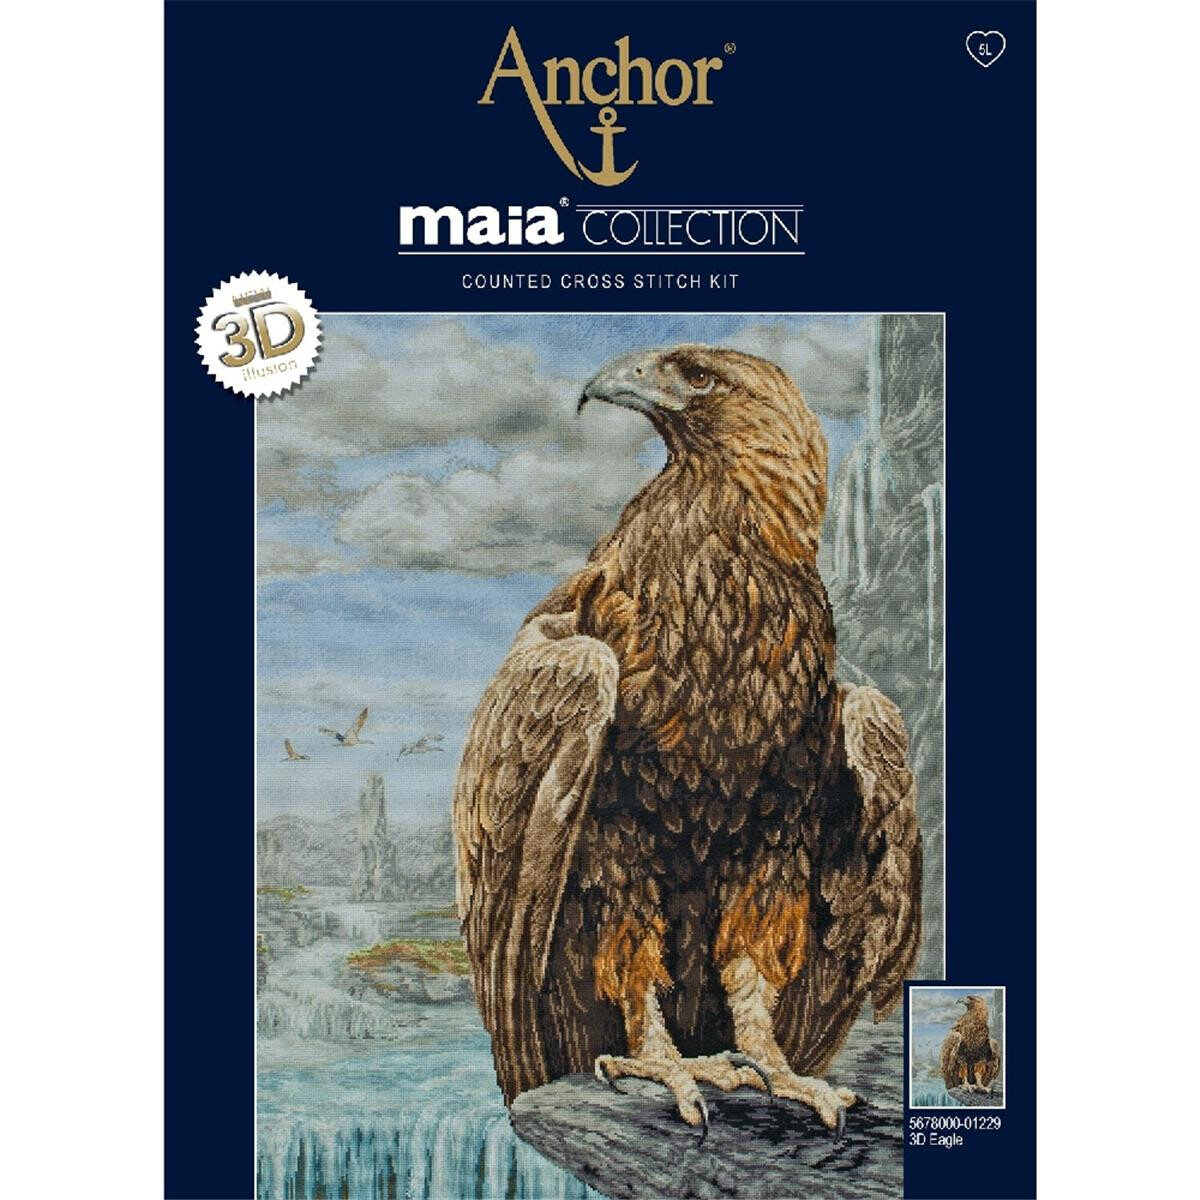 Anchor Maia Collection counted Cross Stitch kit "3D...